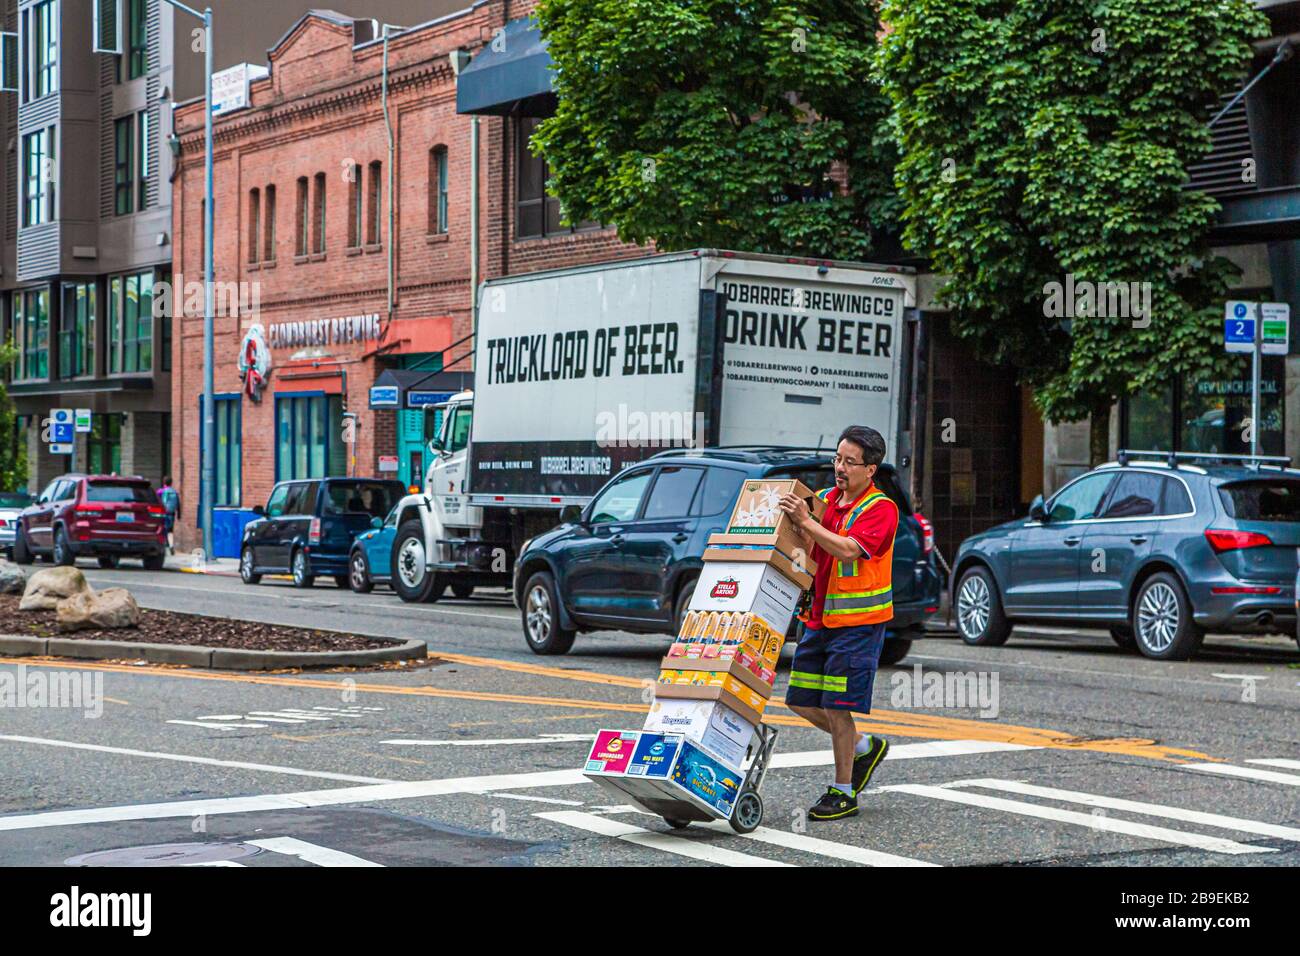 Man Delivering a Truckload of Beer Stock Photo